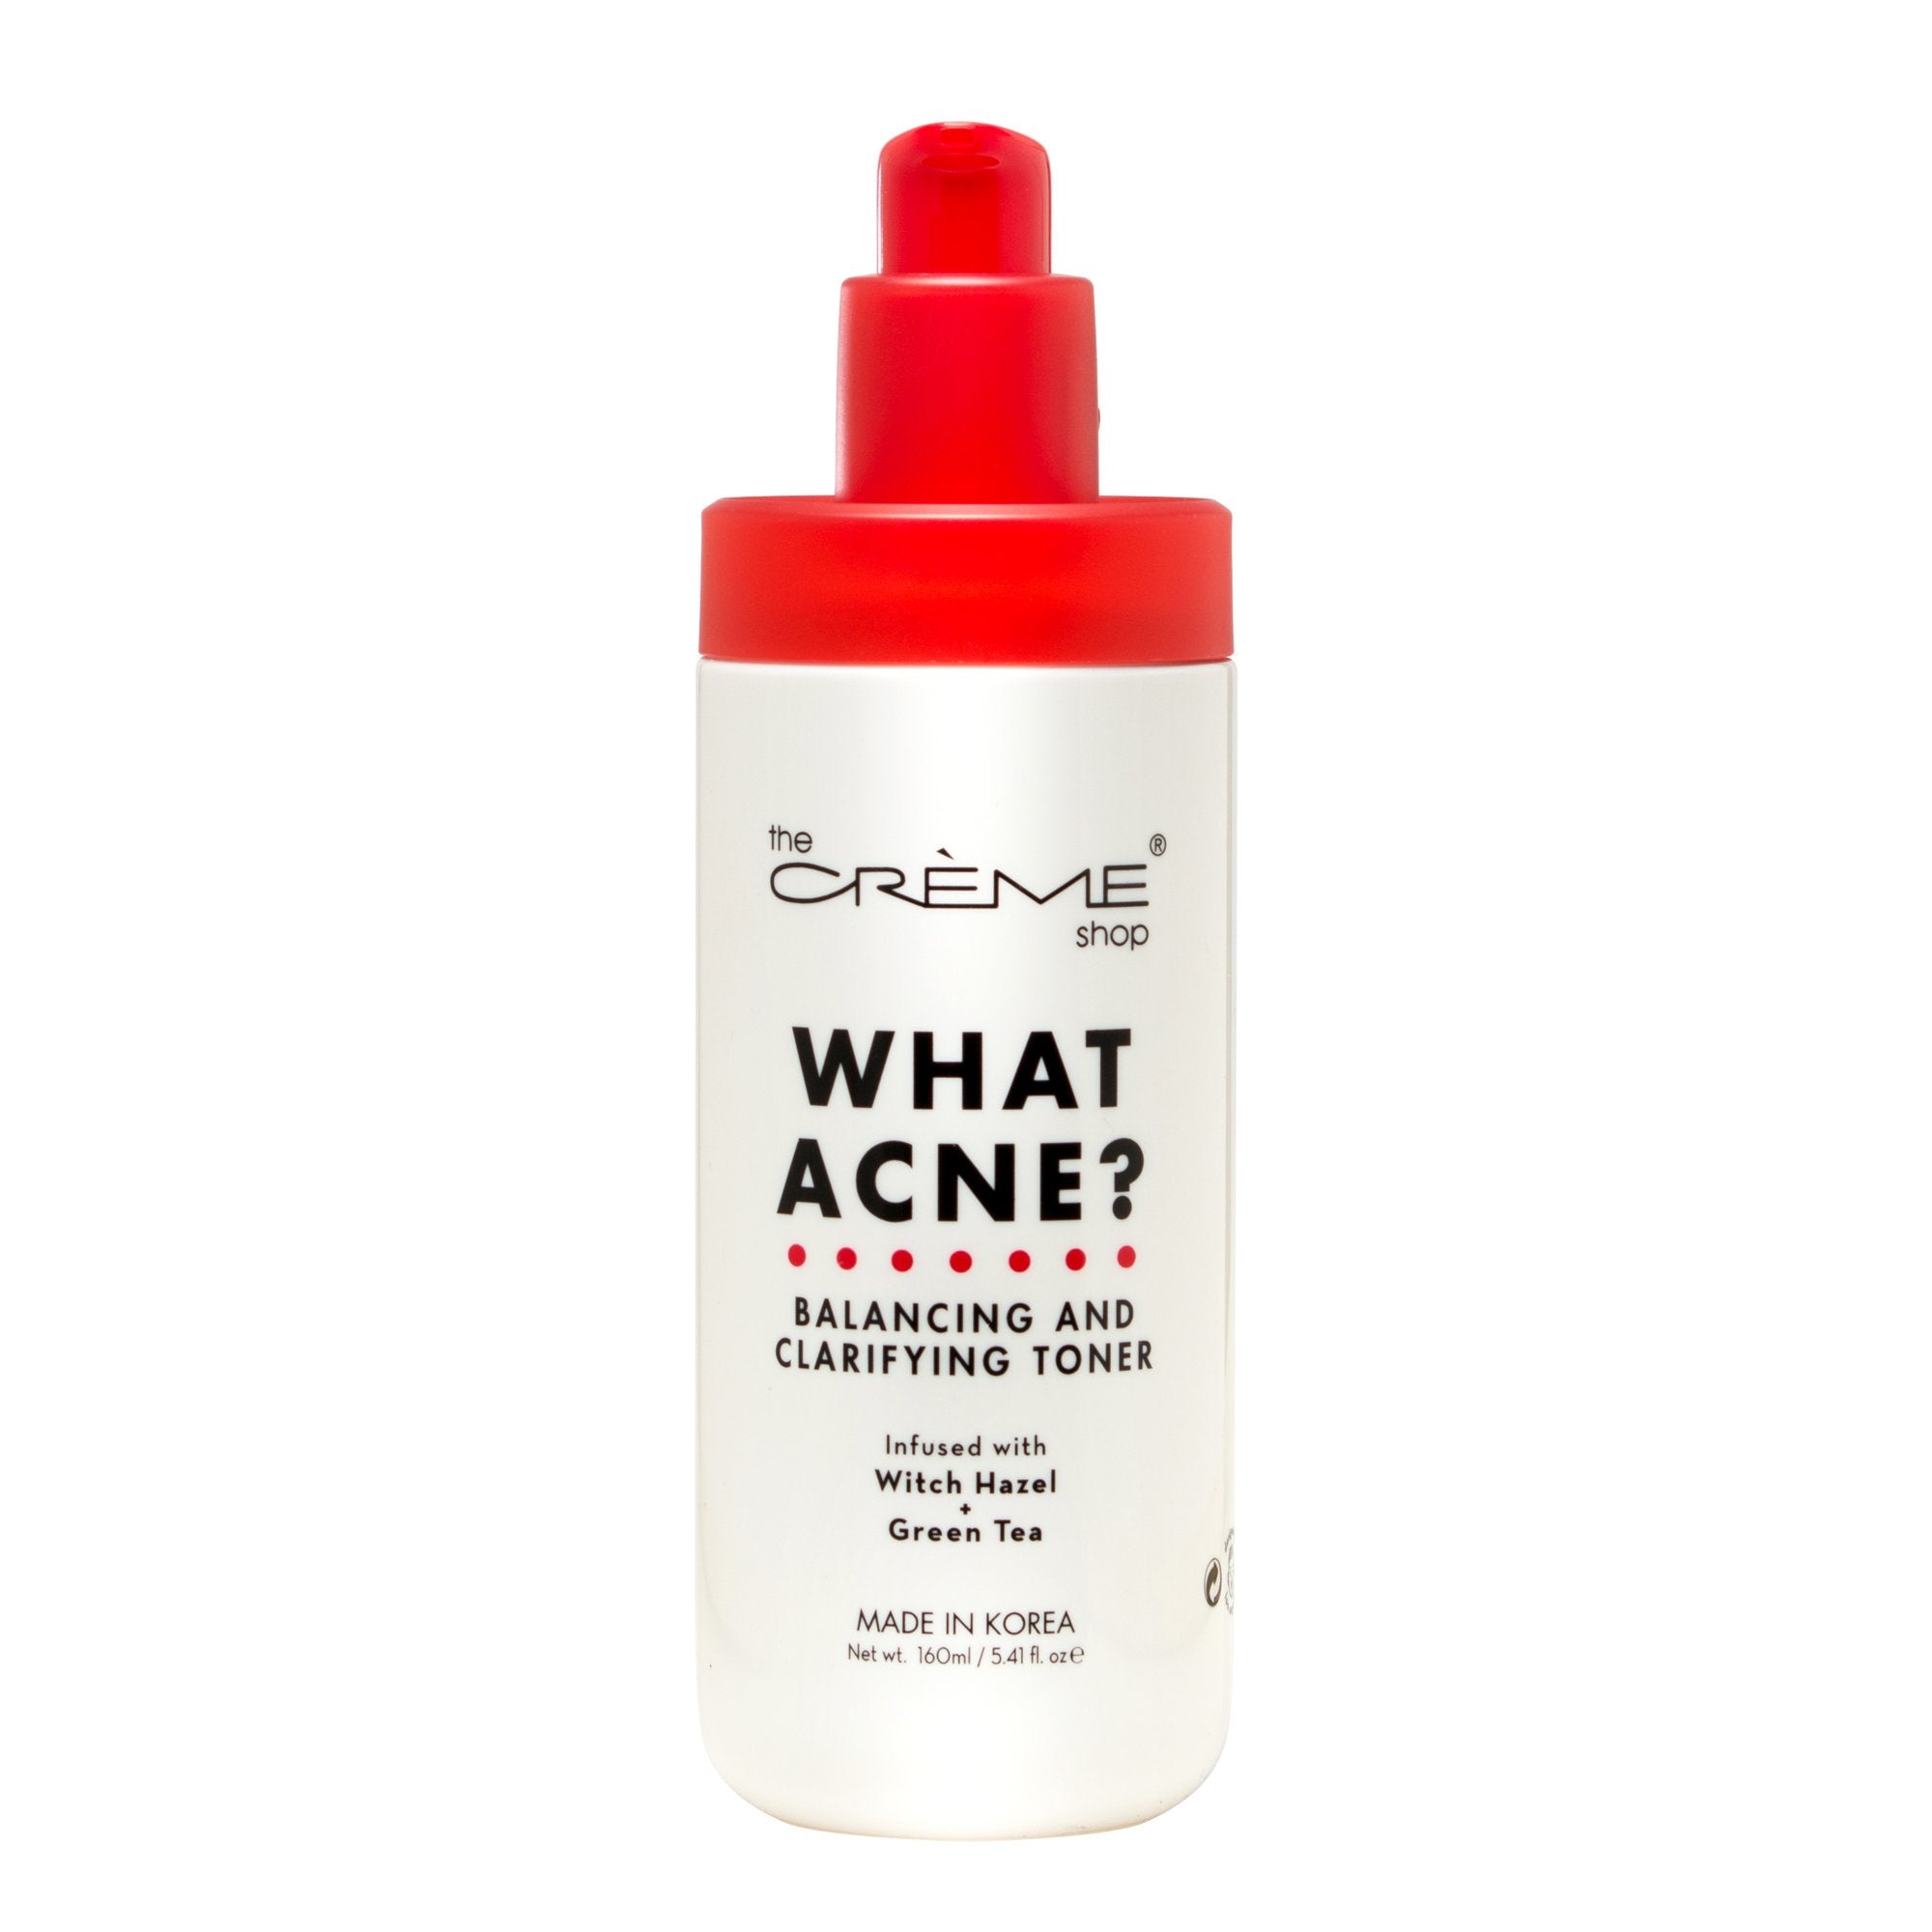 What Acne? - Balancing and Clarifying Toner - The Crème Shop